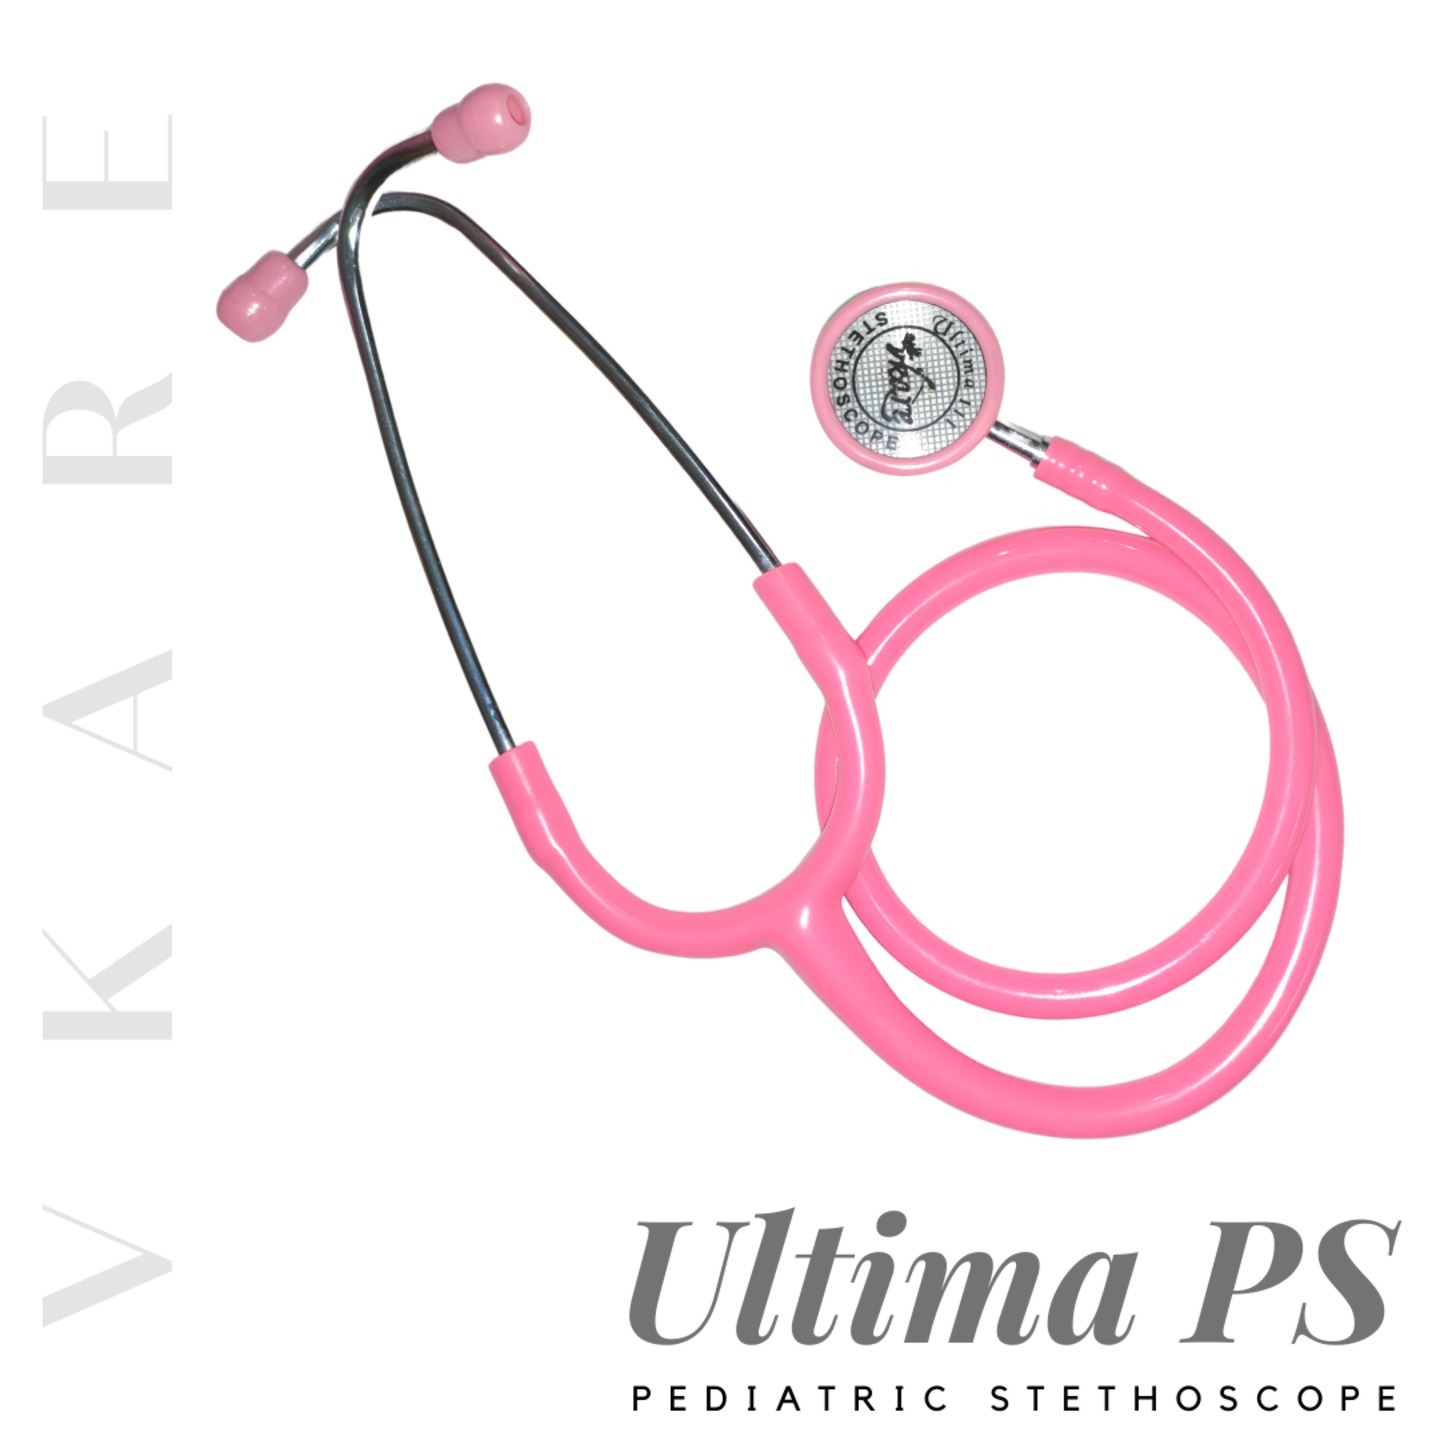 Vkare Pediatric Stainless Steel Stethoscope - Ultima PS